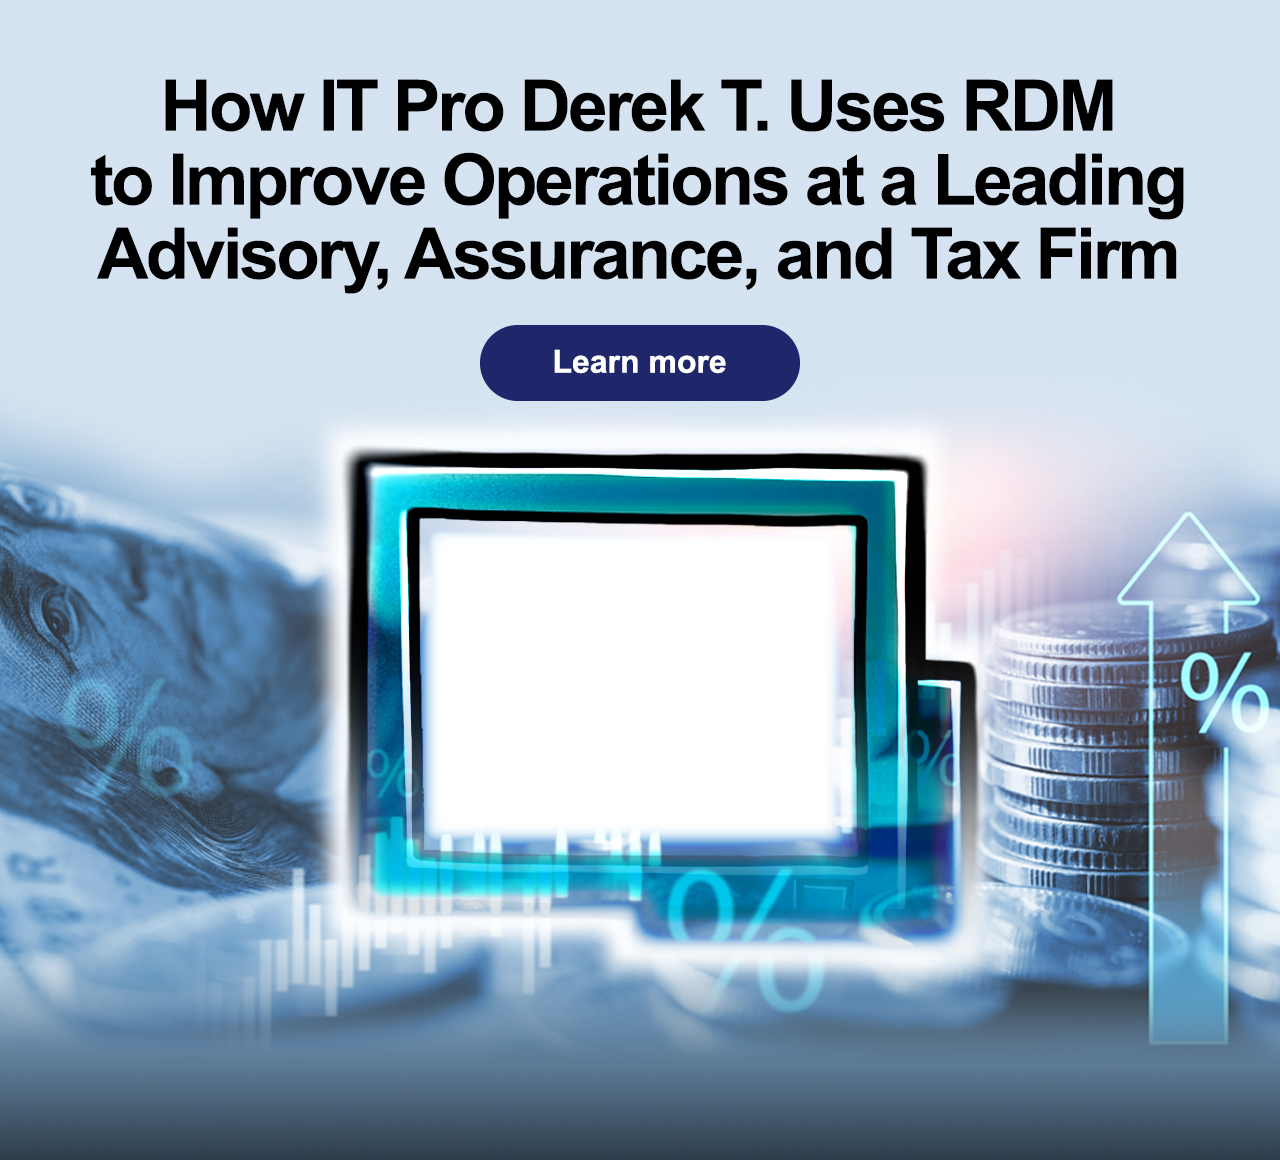 How IT Pro Derek T. Uses RDM to Improve Operations at a Leading Advisory, Assurance, and Tax Firm